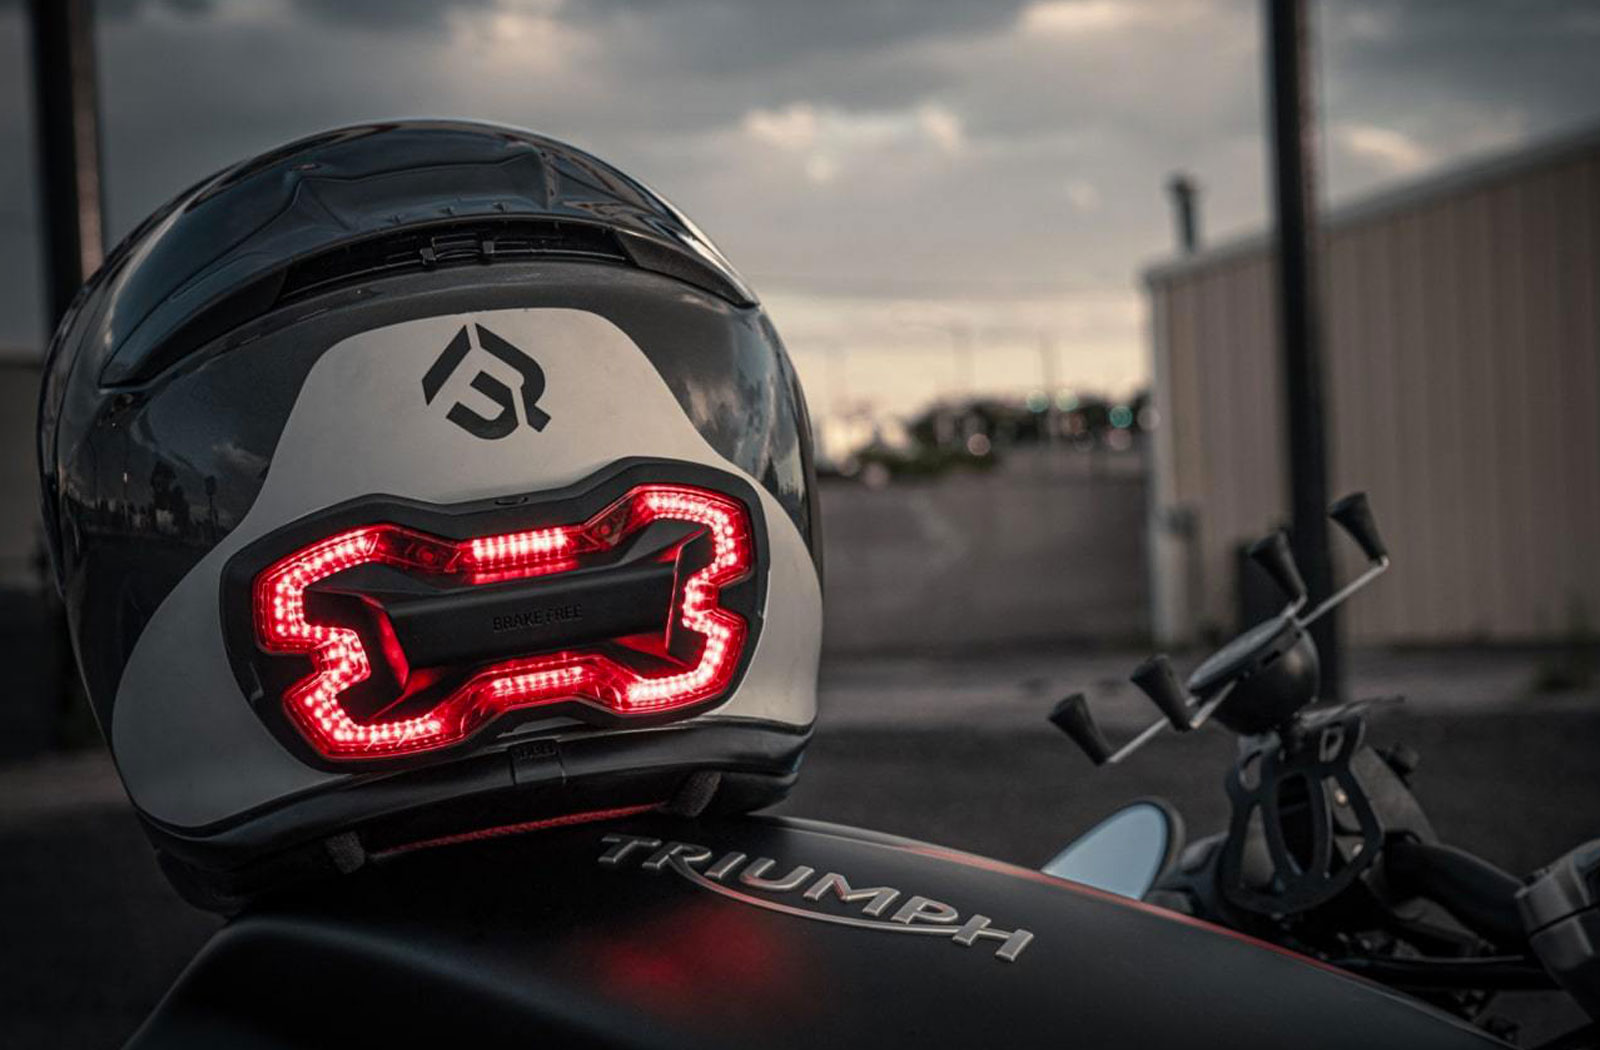 Motorcycle helmet with light on back sitting on Triumph bike